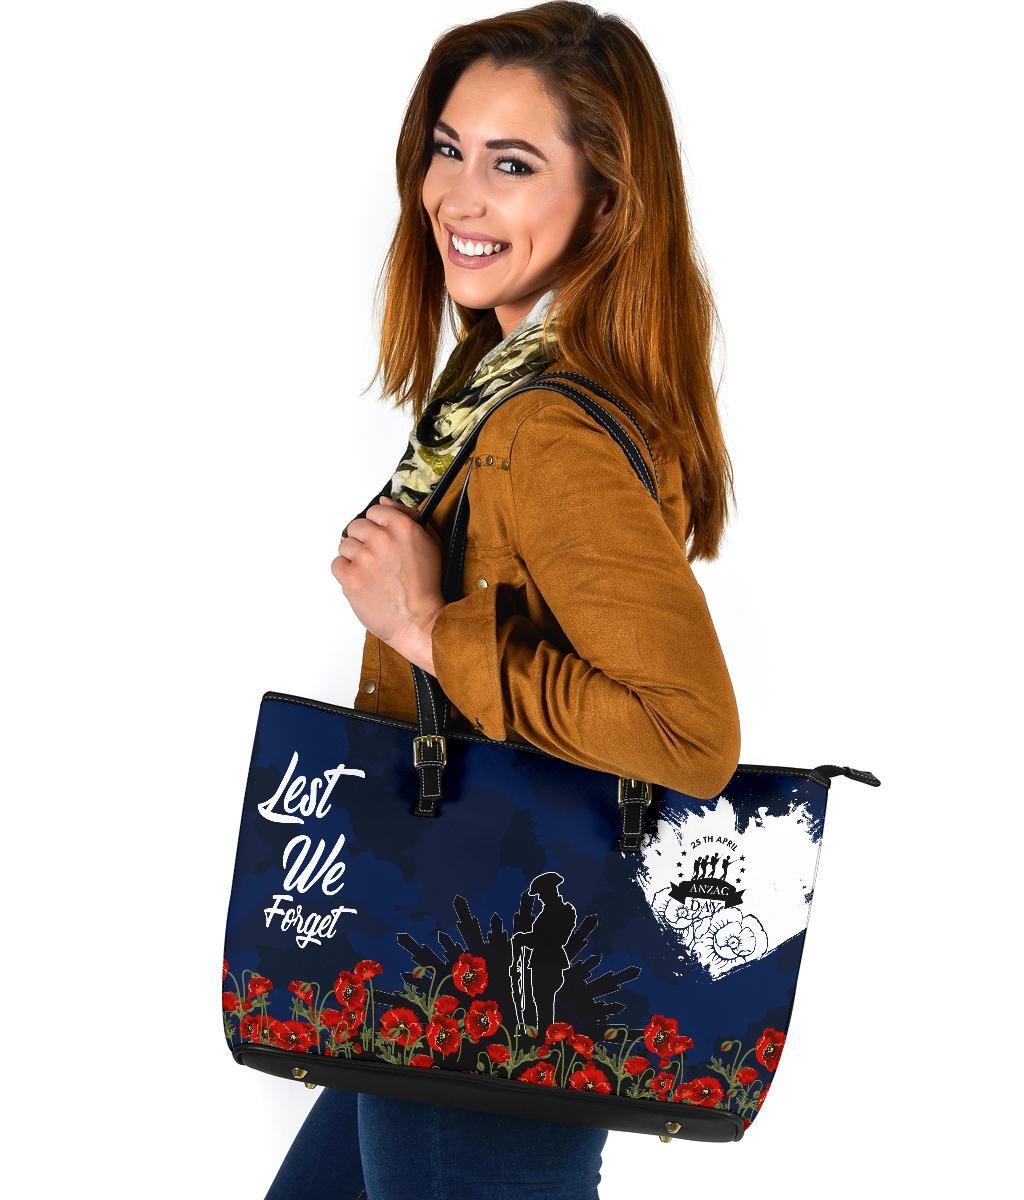 anzac-day-large-leather-tote-bags-australia-anzac-day-2021